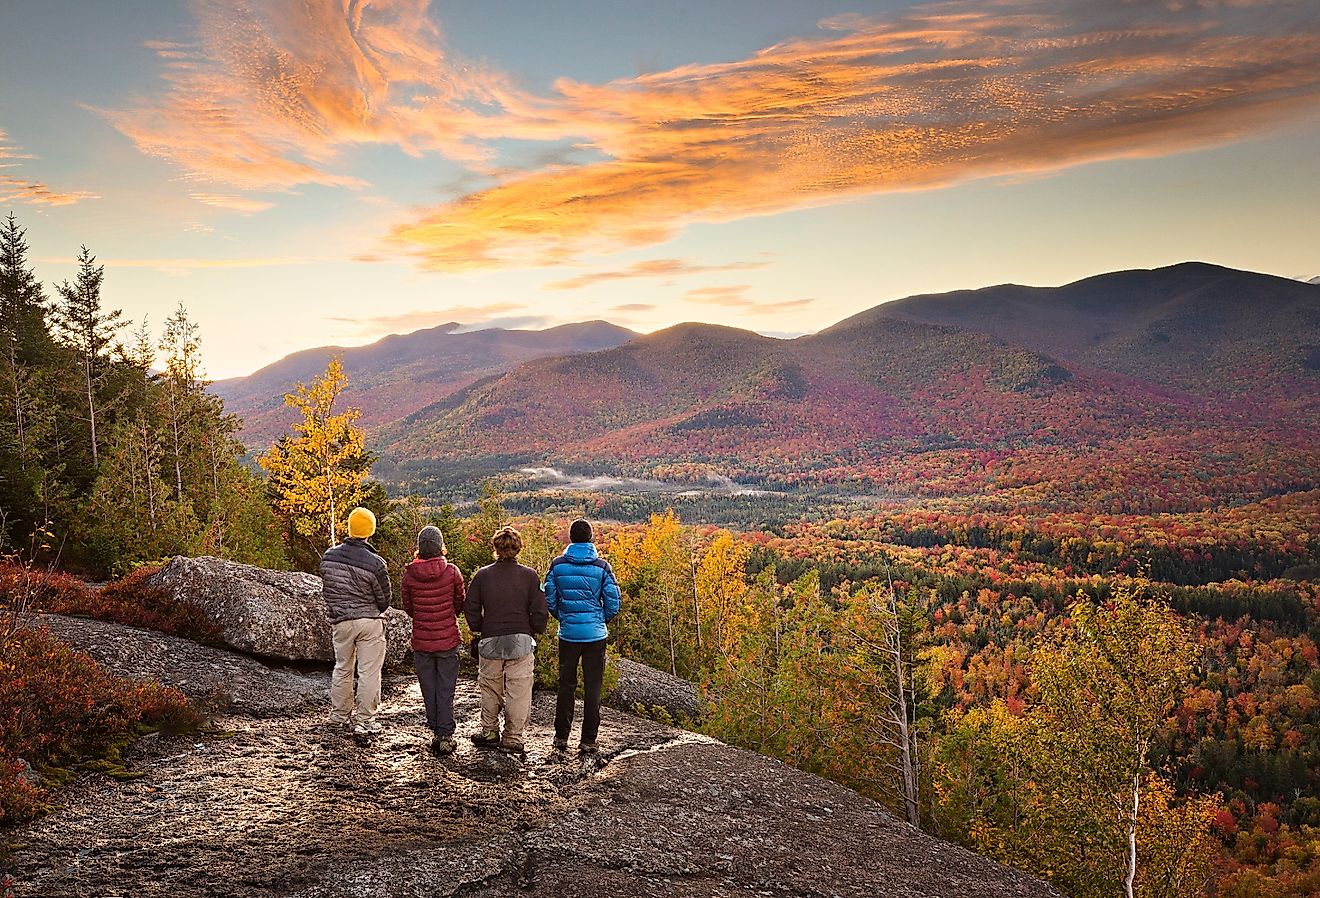 Group of hikers enjoying the view of the fall colors in the Adirondacks in New York.